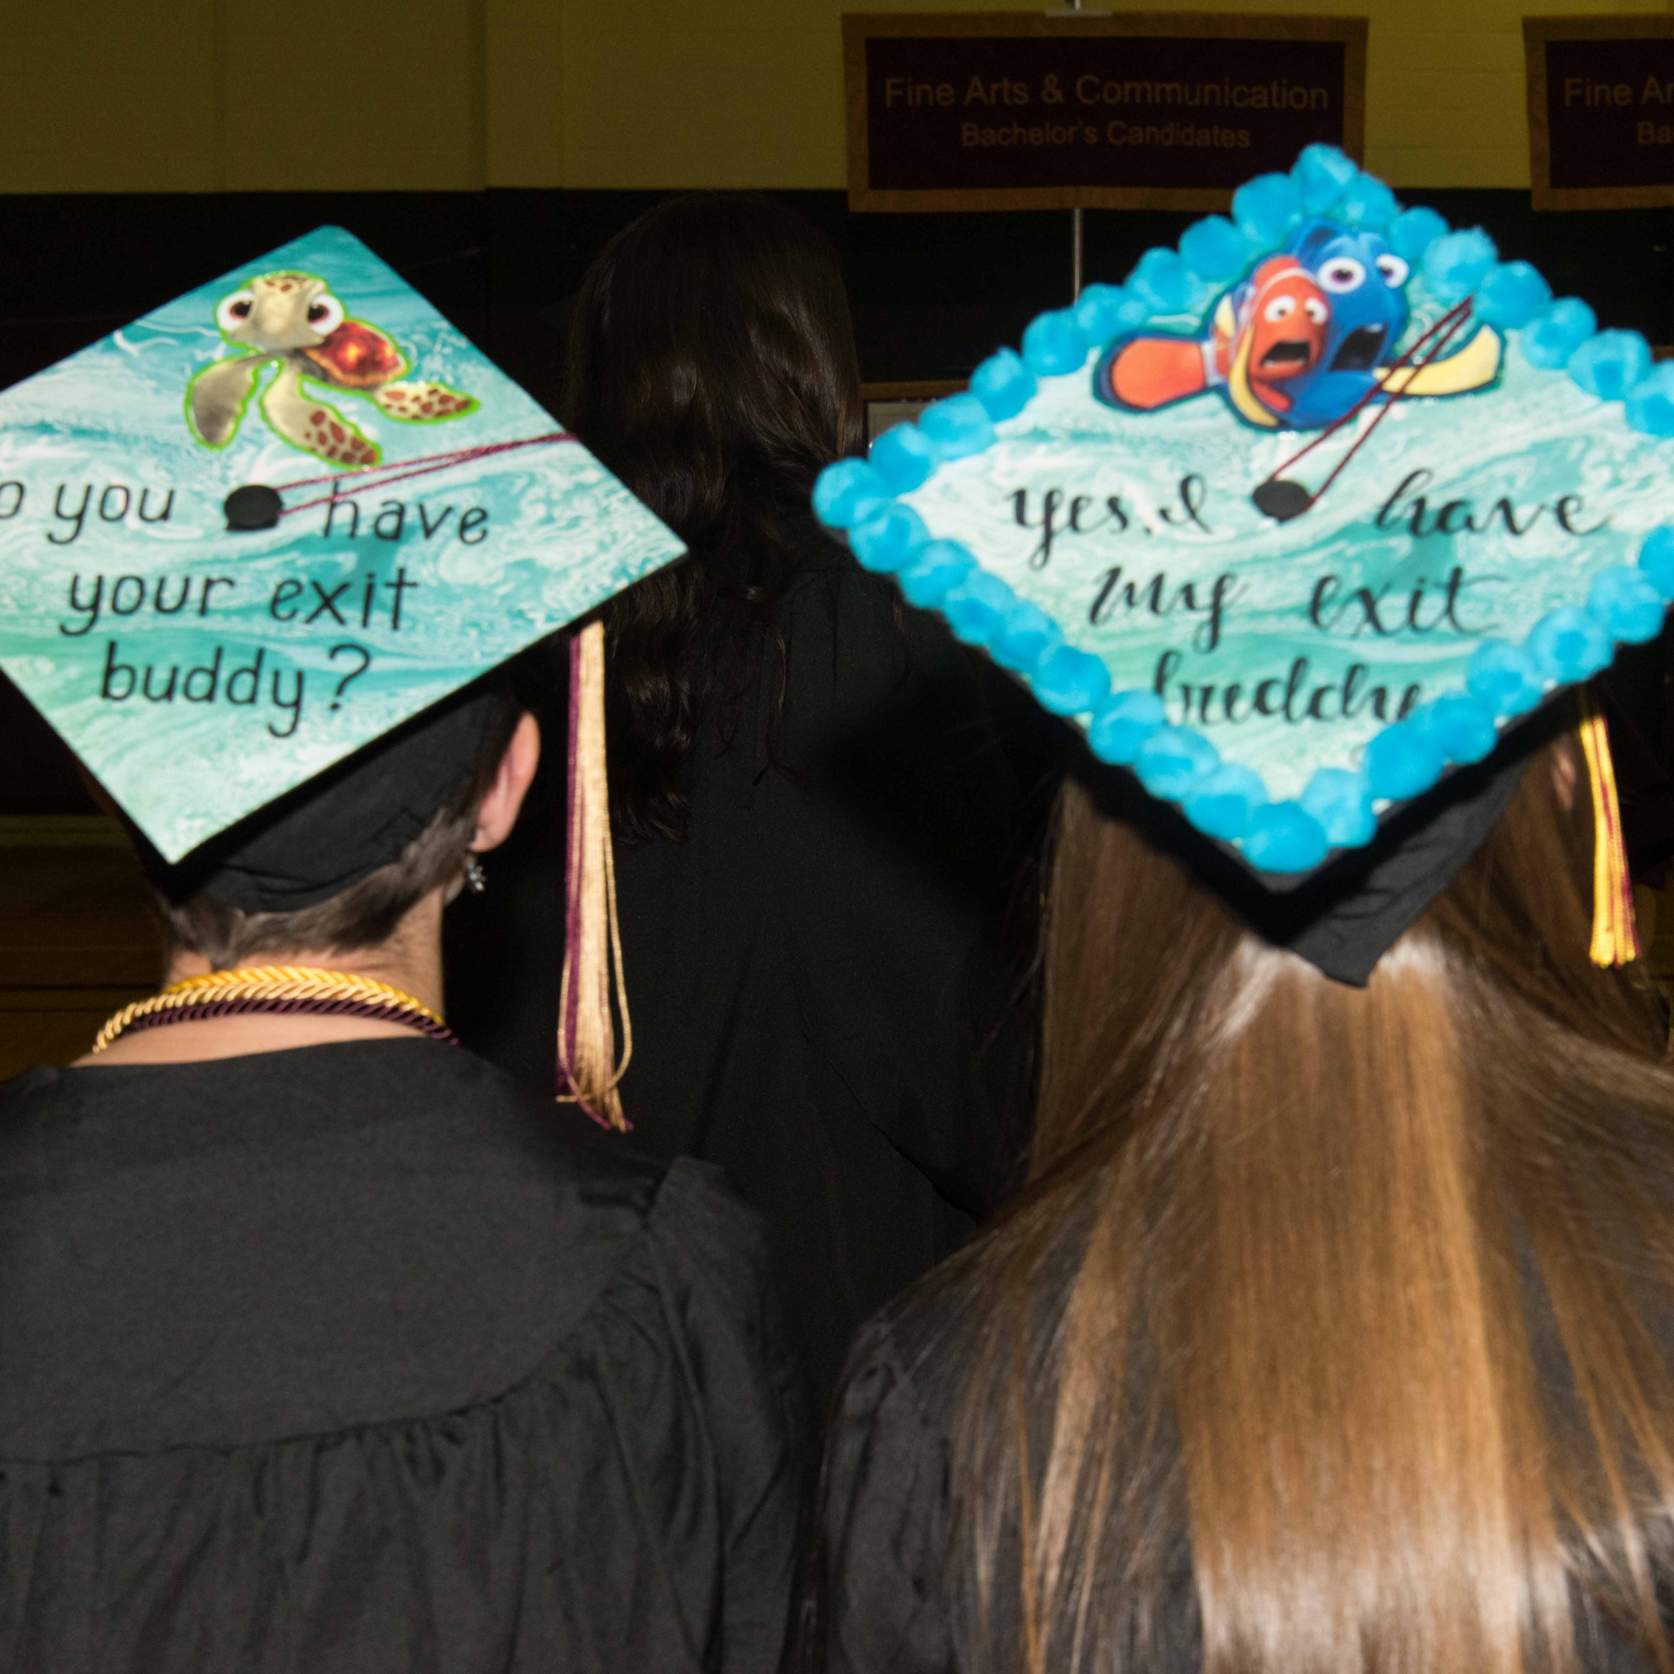 Cap design by graduates saying (cap one) "do you have your exit buddy?" and (cap two) "Yes, I have my exit buddy"